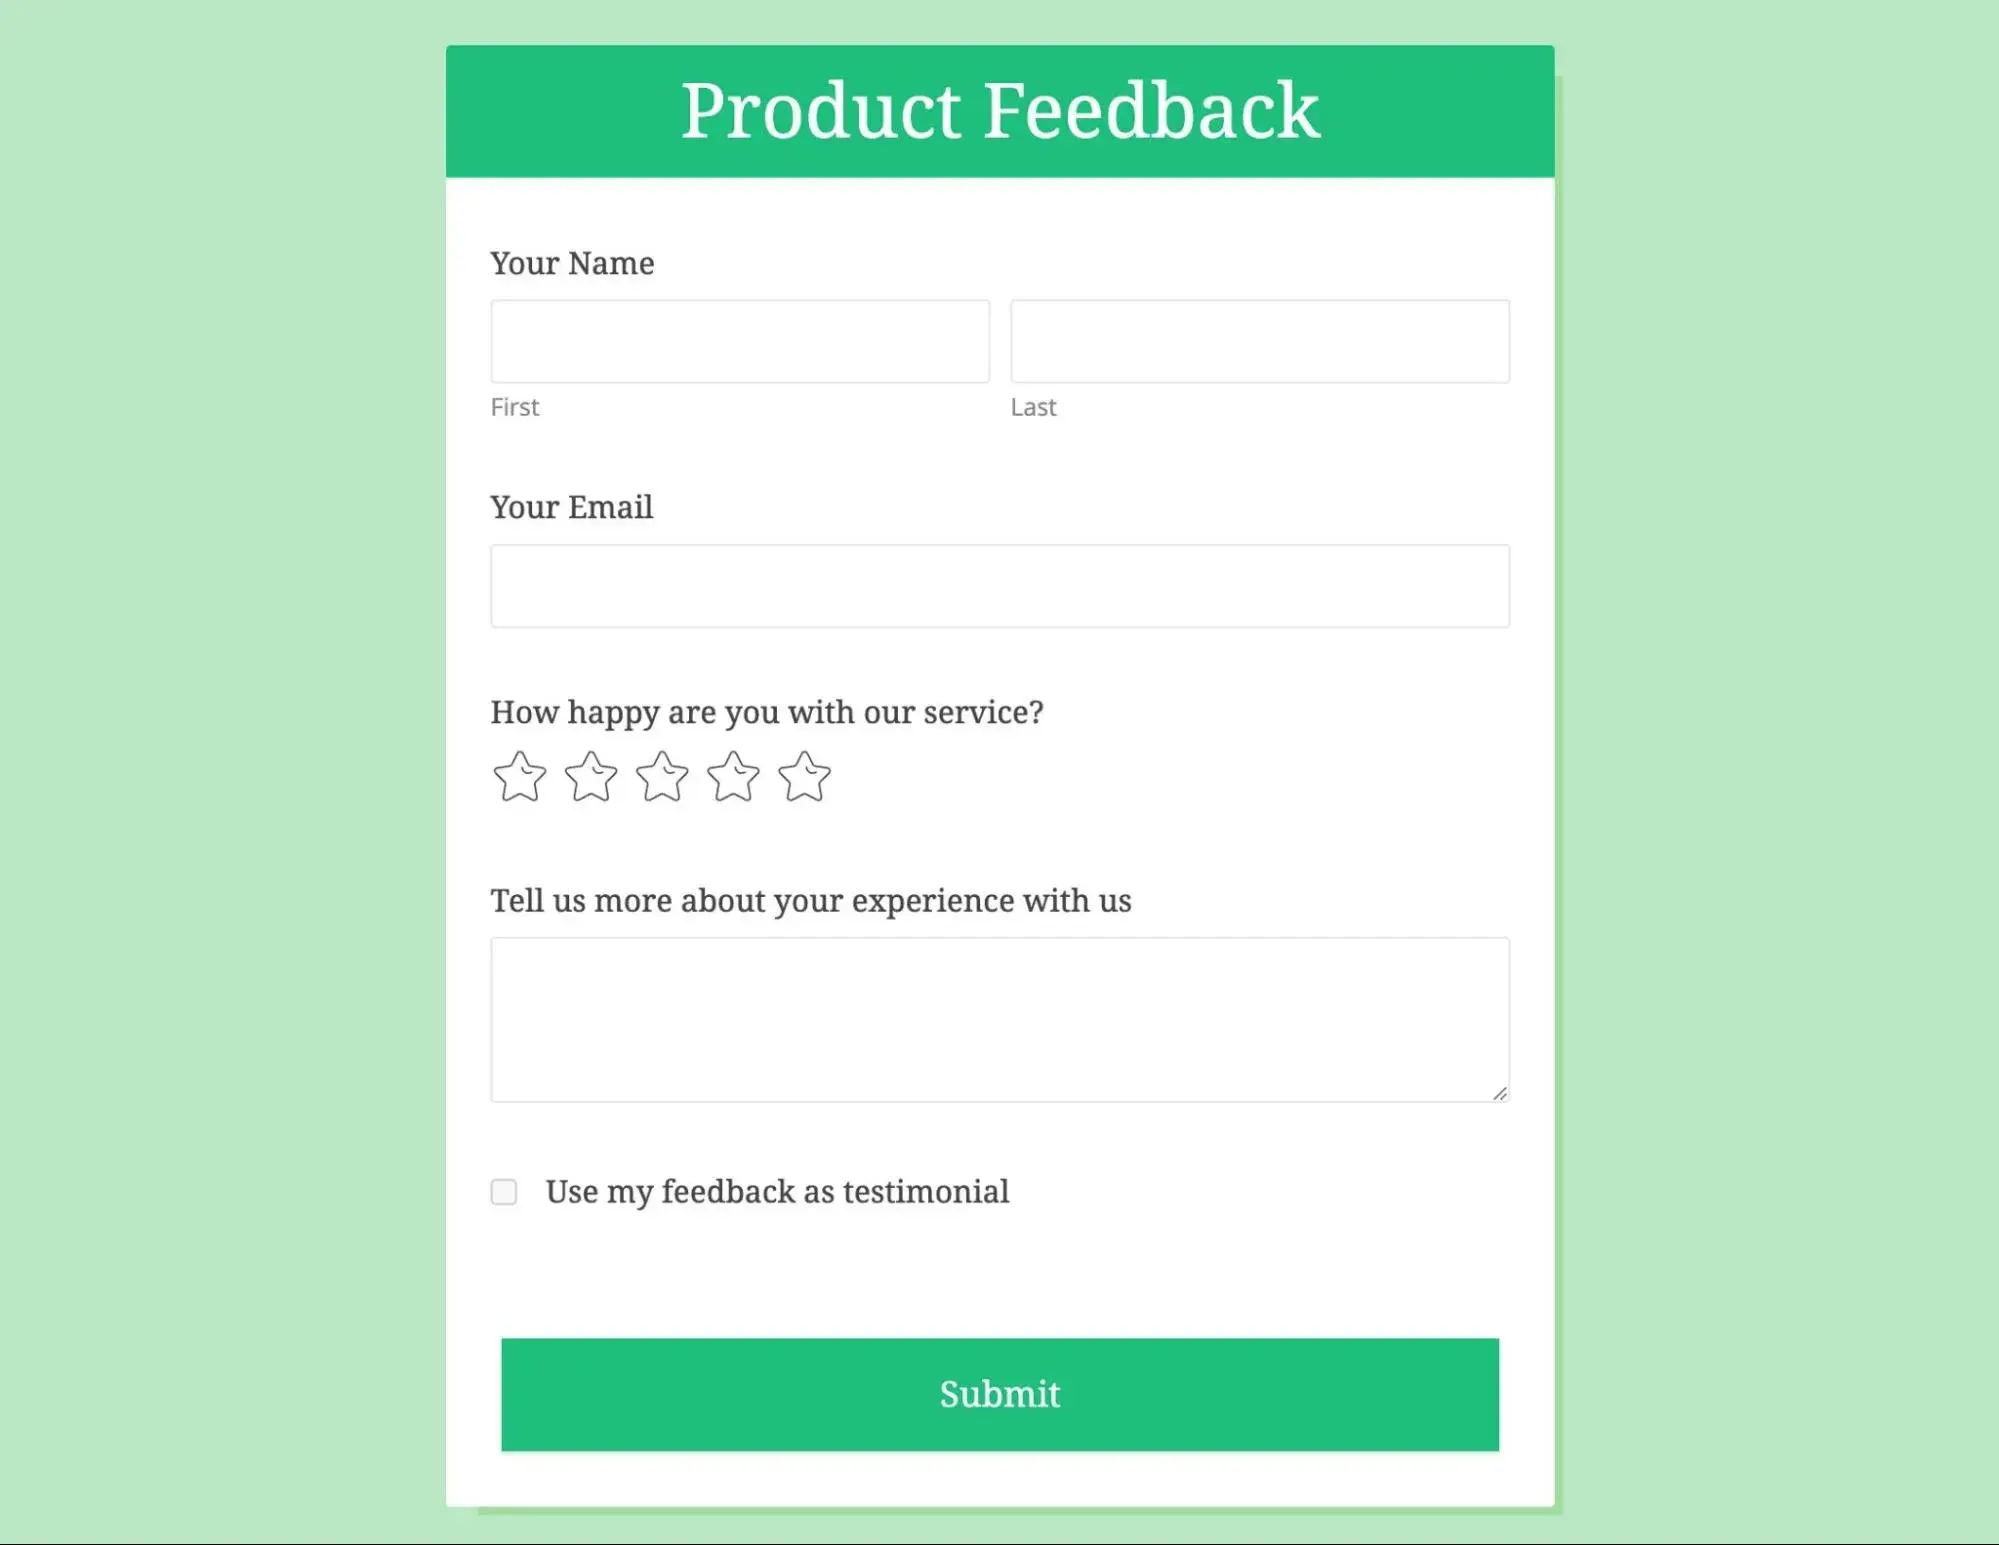 A product feedback survey from Zoho Forms